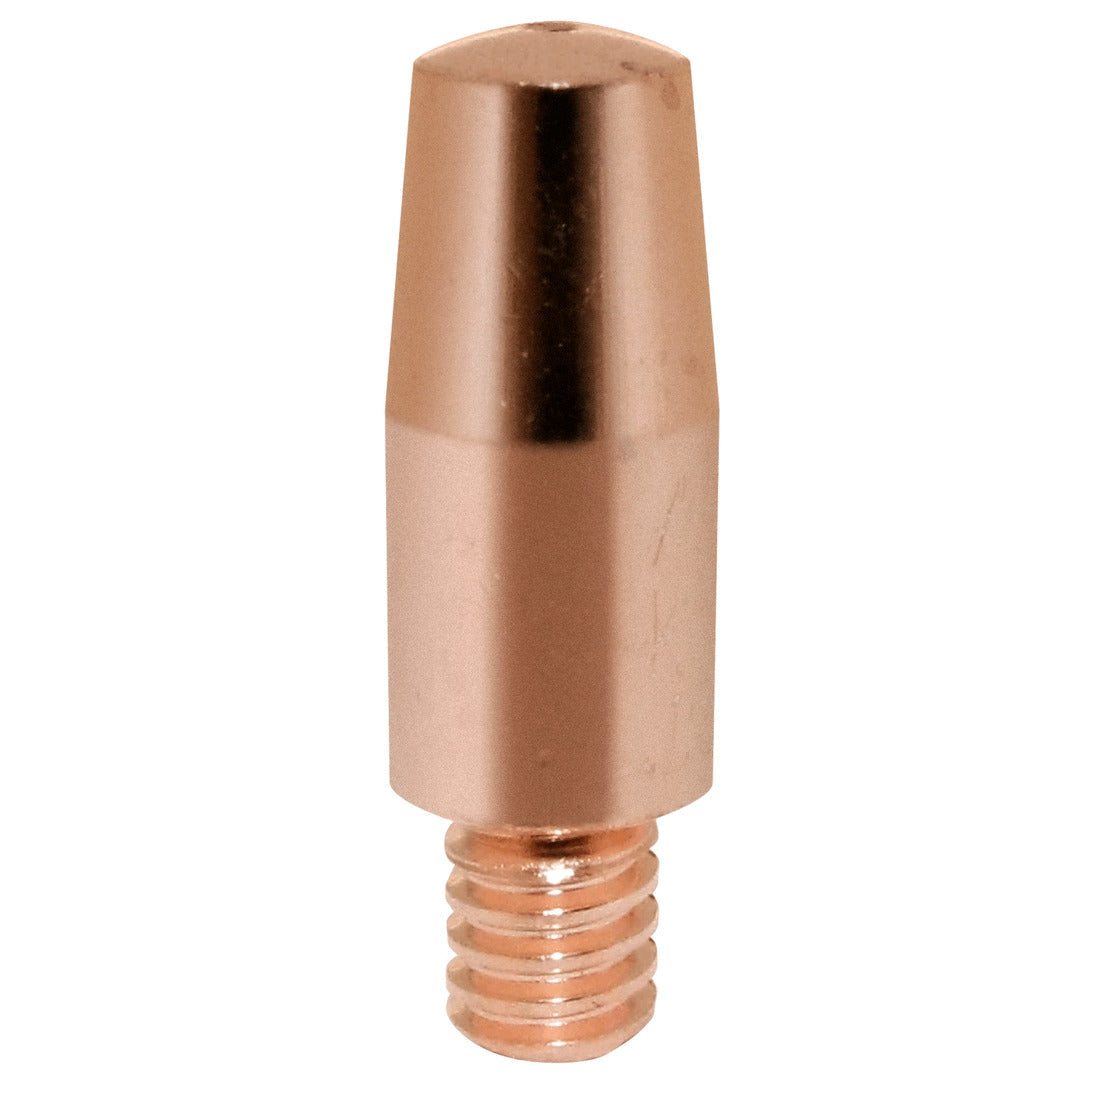 Lincoln Copper Plus Contact Tip - 350A, Standard, 1/16 in (1.6 mm) - 10/pack (KP2744-116)